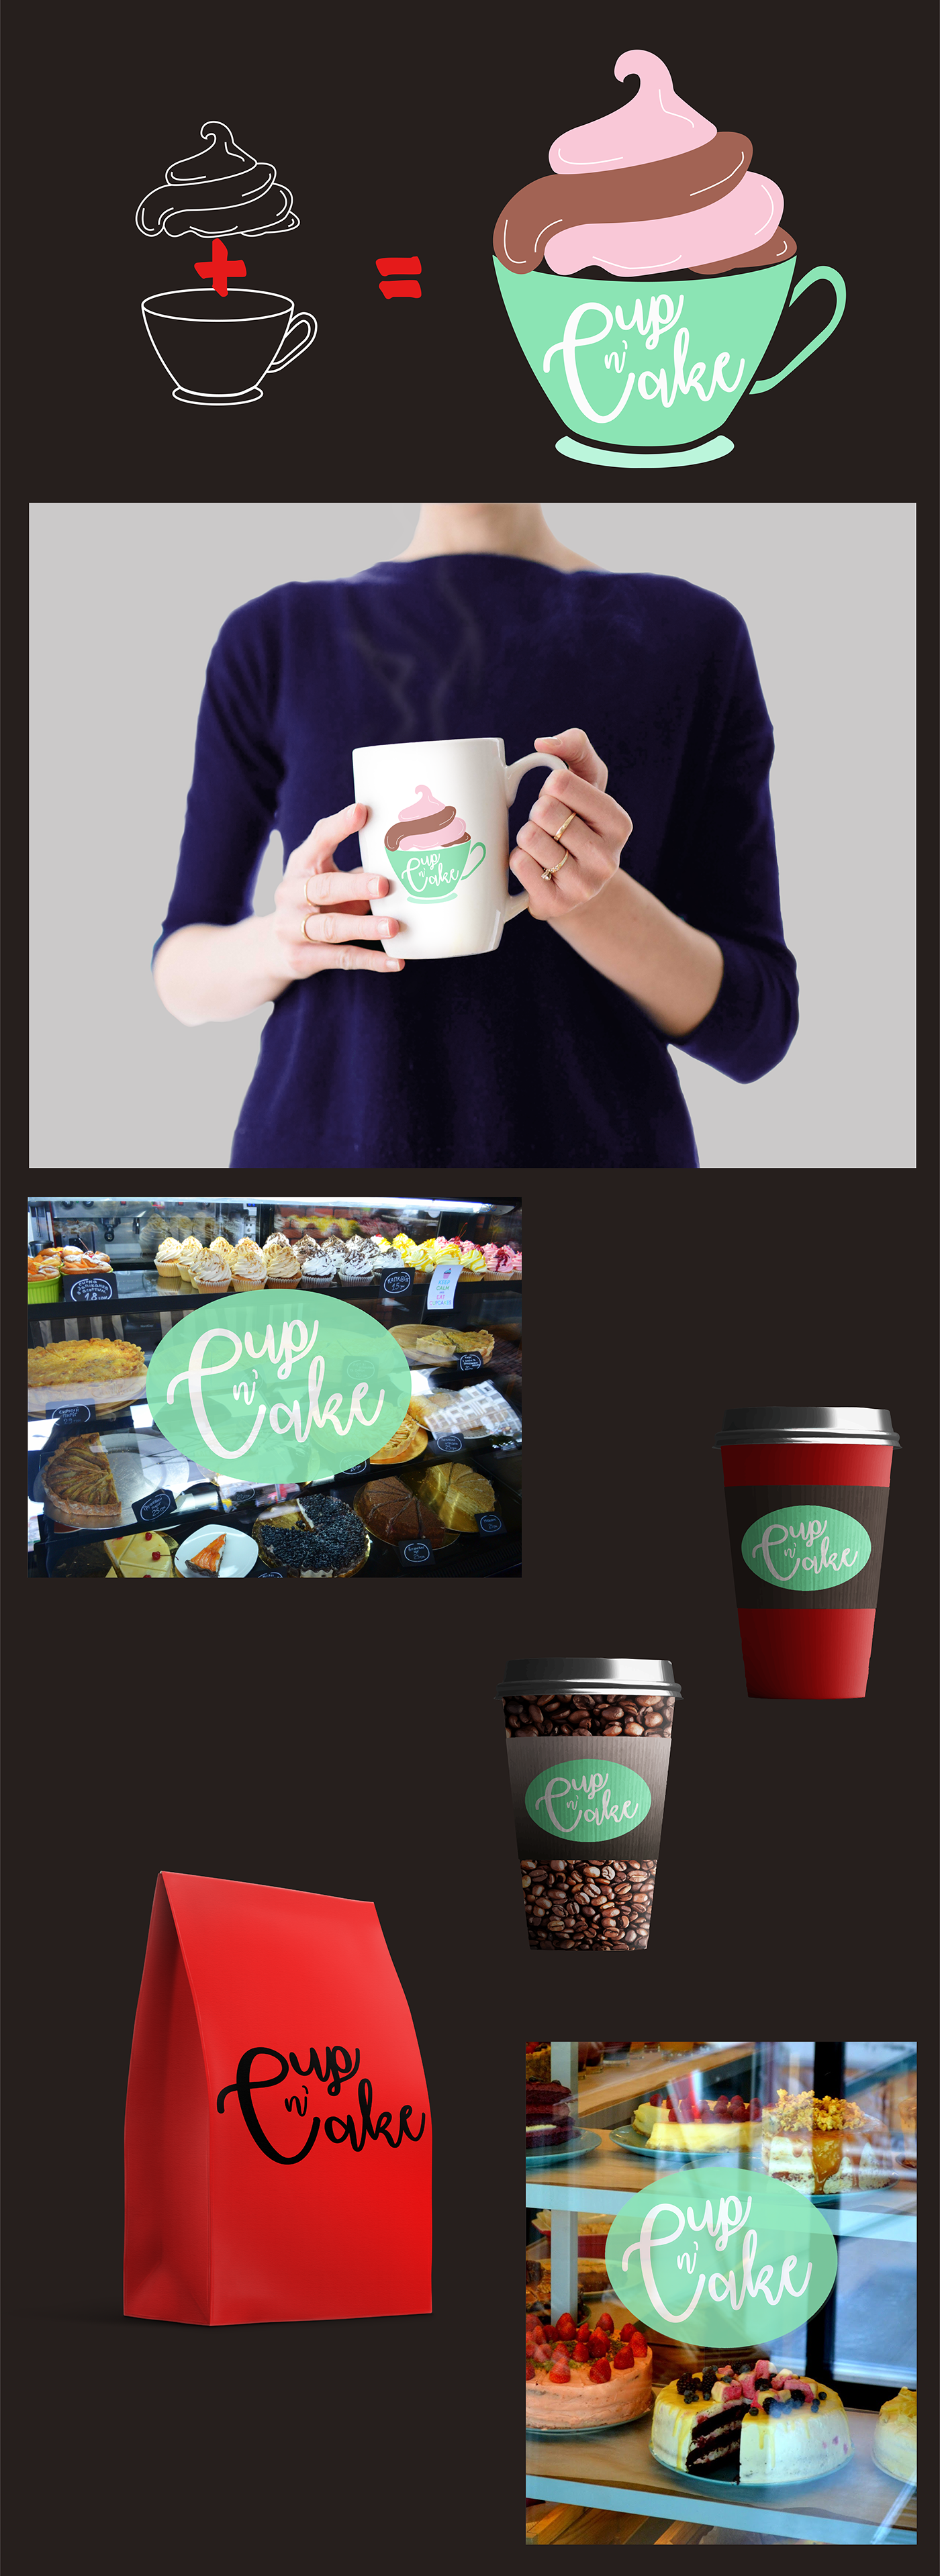 Coffee cup cafe design marketing   Packaging